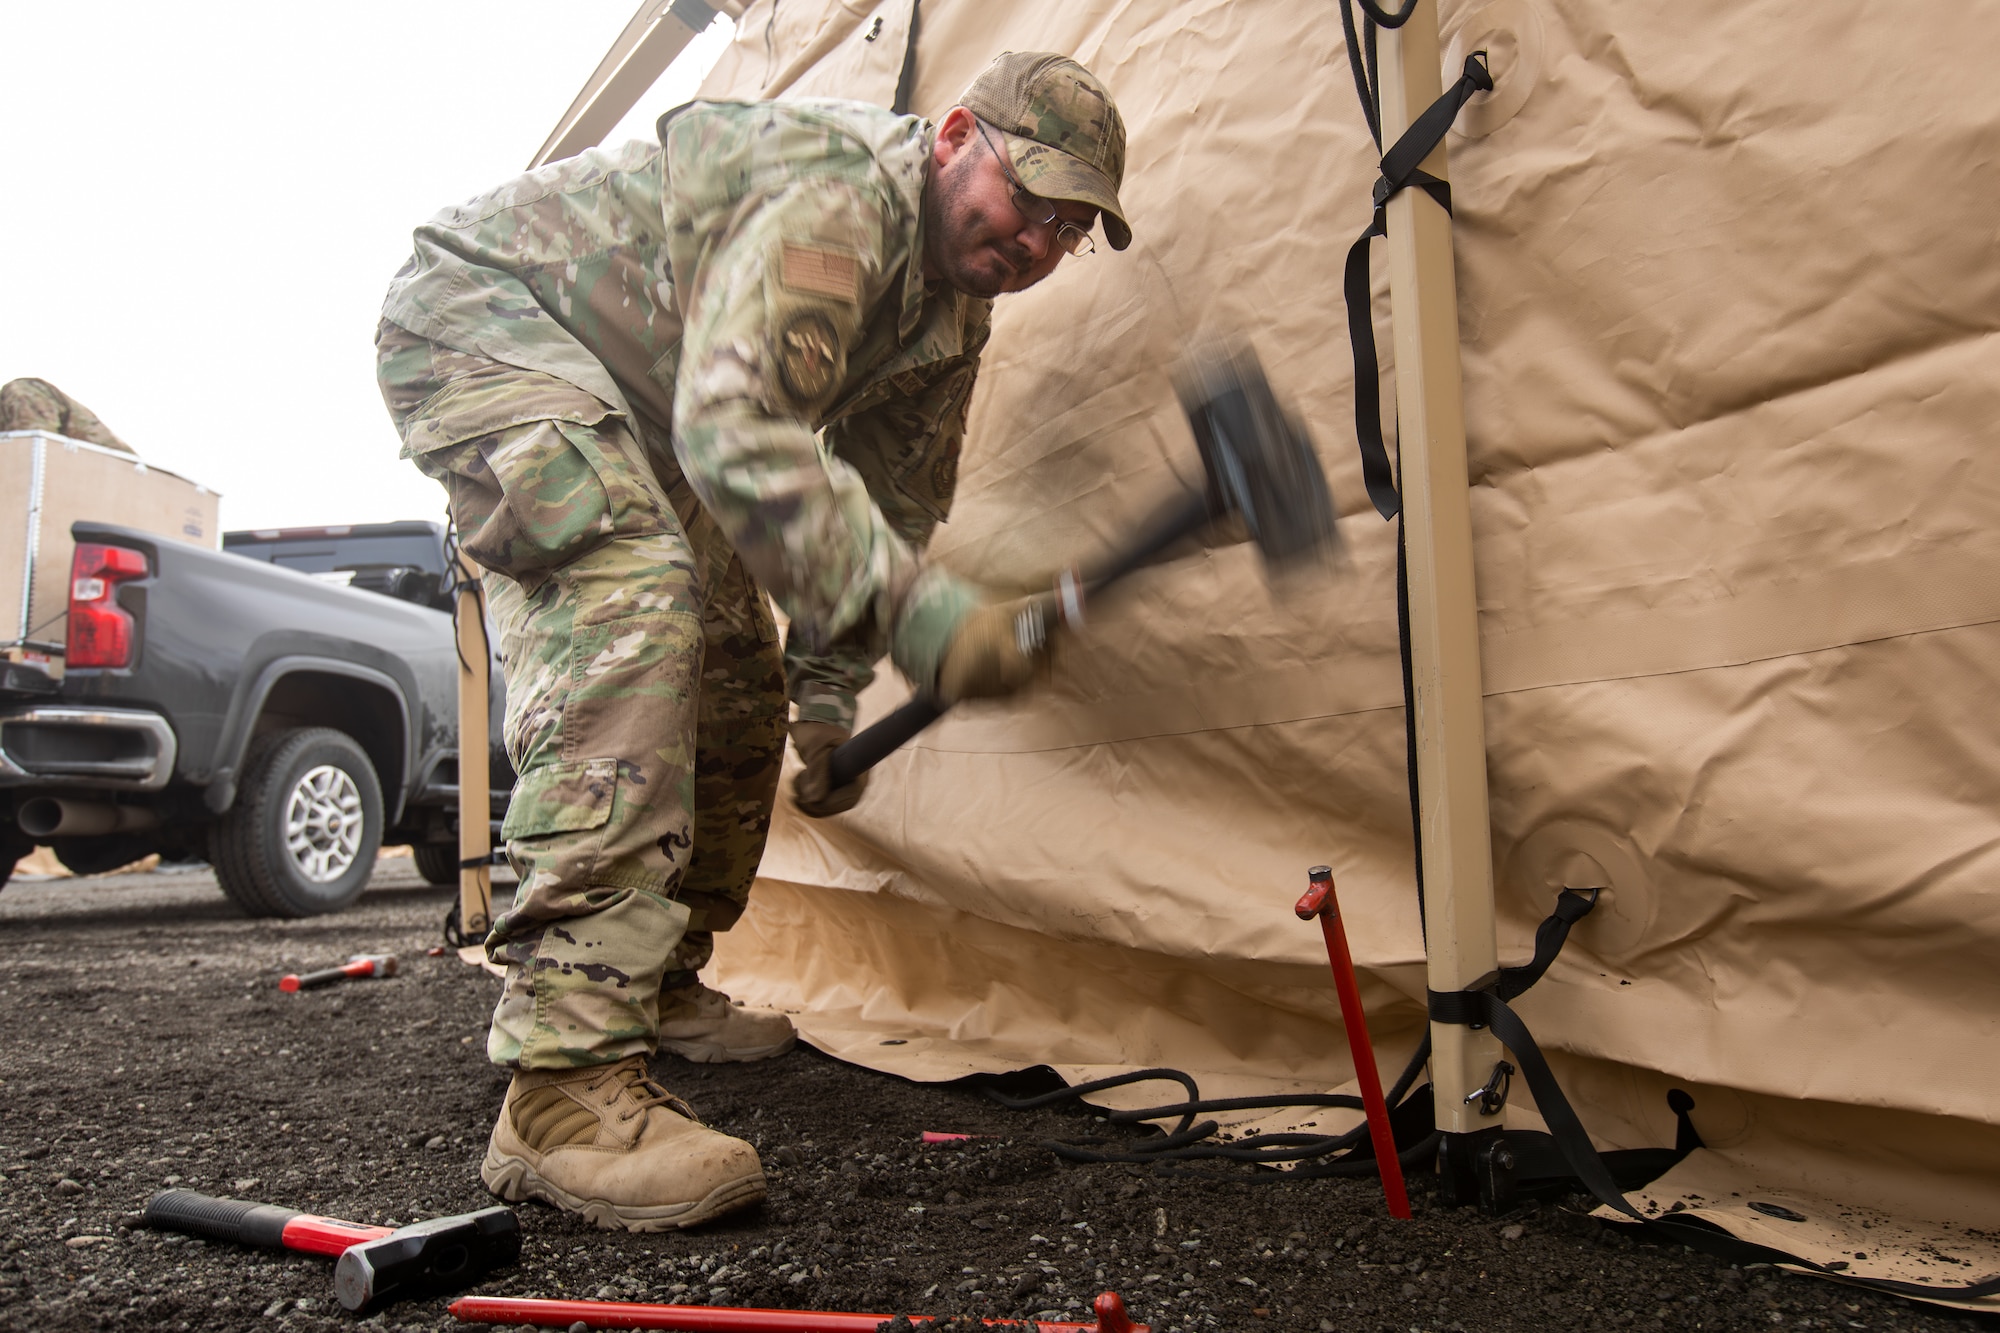 U.S. Air Force Tech. Sgt. Austin Myers, a water and fuel systems maintenance supervisor assigned to 773rd Civil Engineer Squadron, secures a solar panel system to a tent frame during an Agile Combat Employment air transportable clinic set up, during Northern Edge 23-1 at Joint Base Elmendorf-Richardson, Alaska, May 9, 2023.